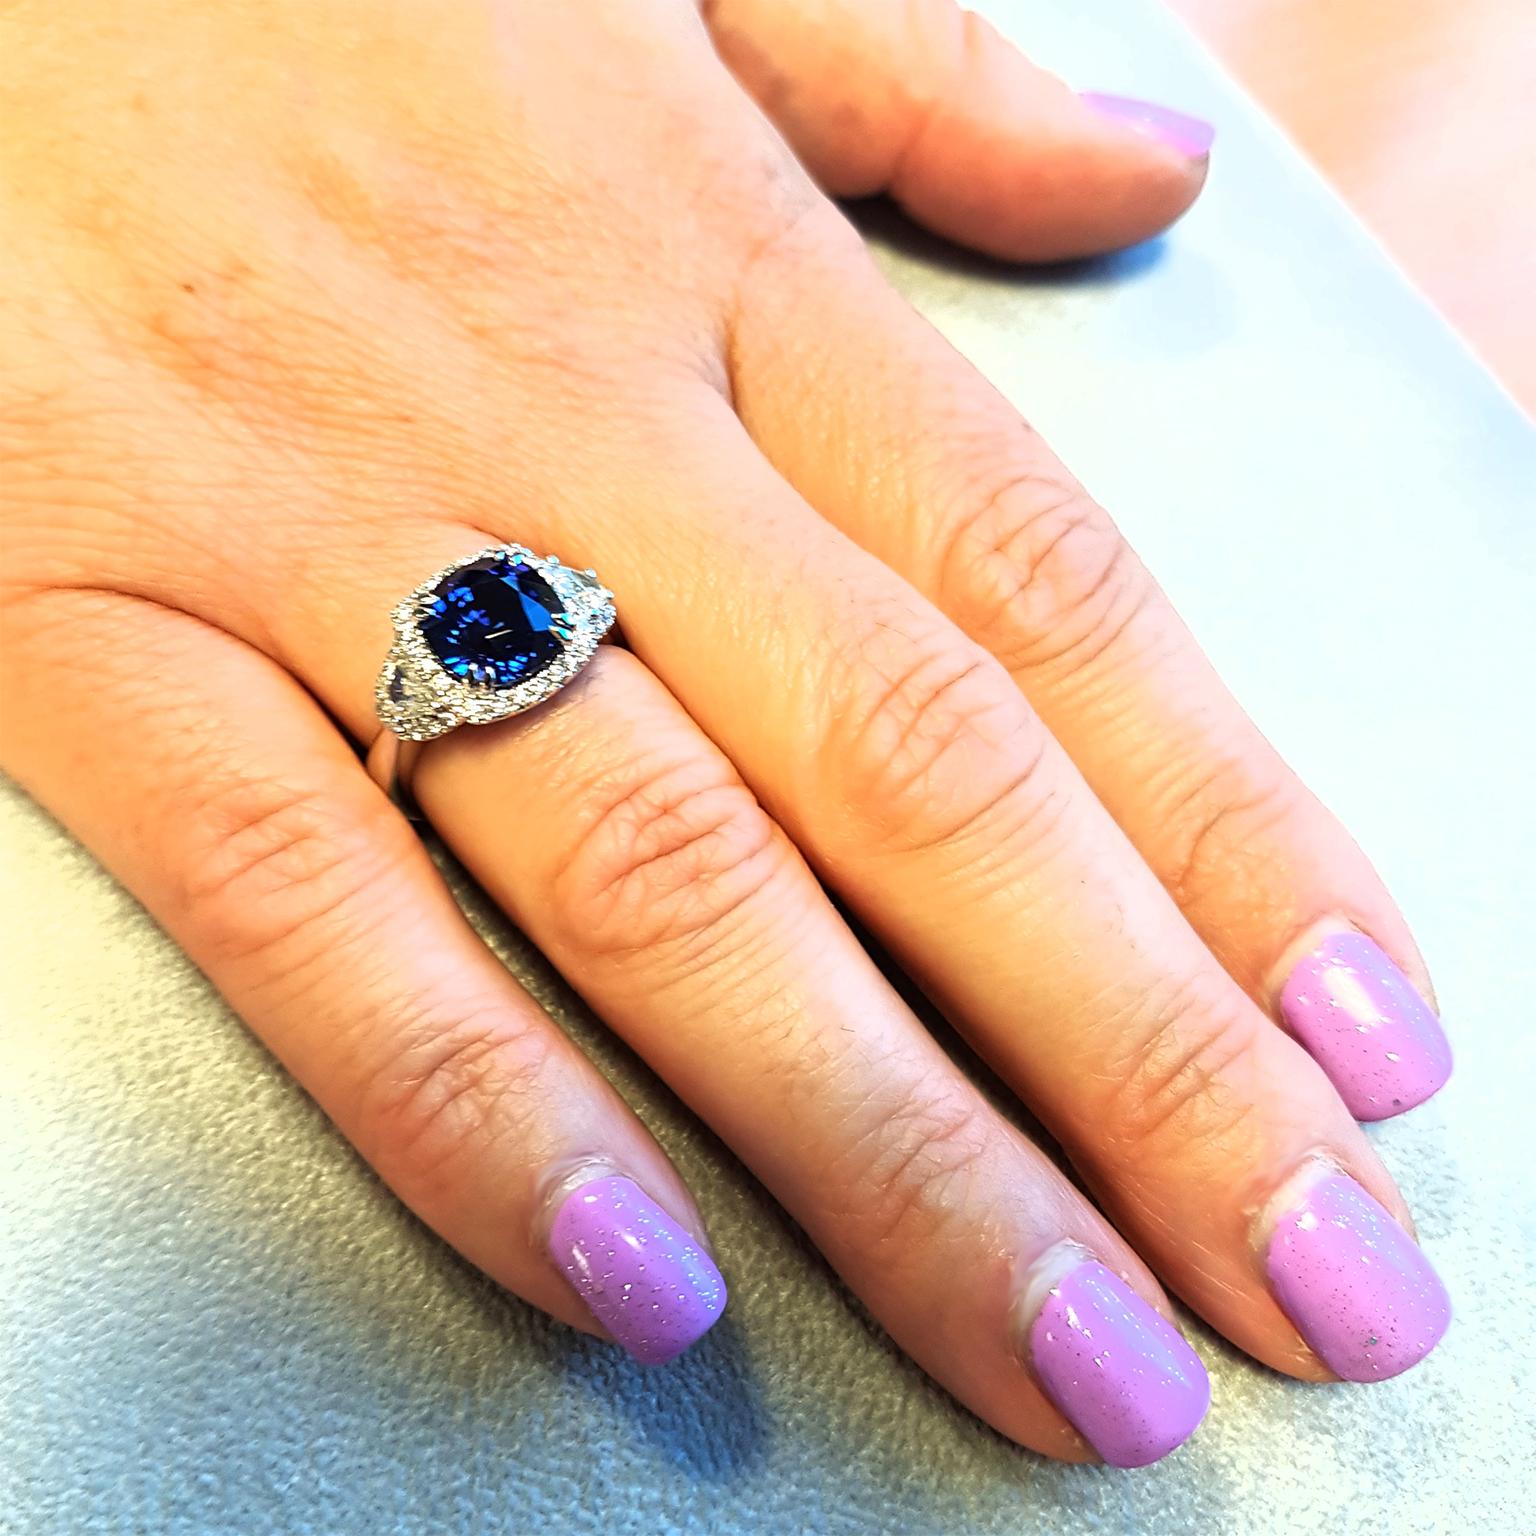 ROYAL BLUE! This gorgeous classic dress ring has been crafted in Platinum set with glittering fine white diamonds (0.70ct) & a certified cushion-cut 5.12ct 'ROYAL-BLUE' Ceylon Sapphire. One-off & Exclusive!